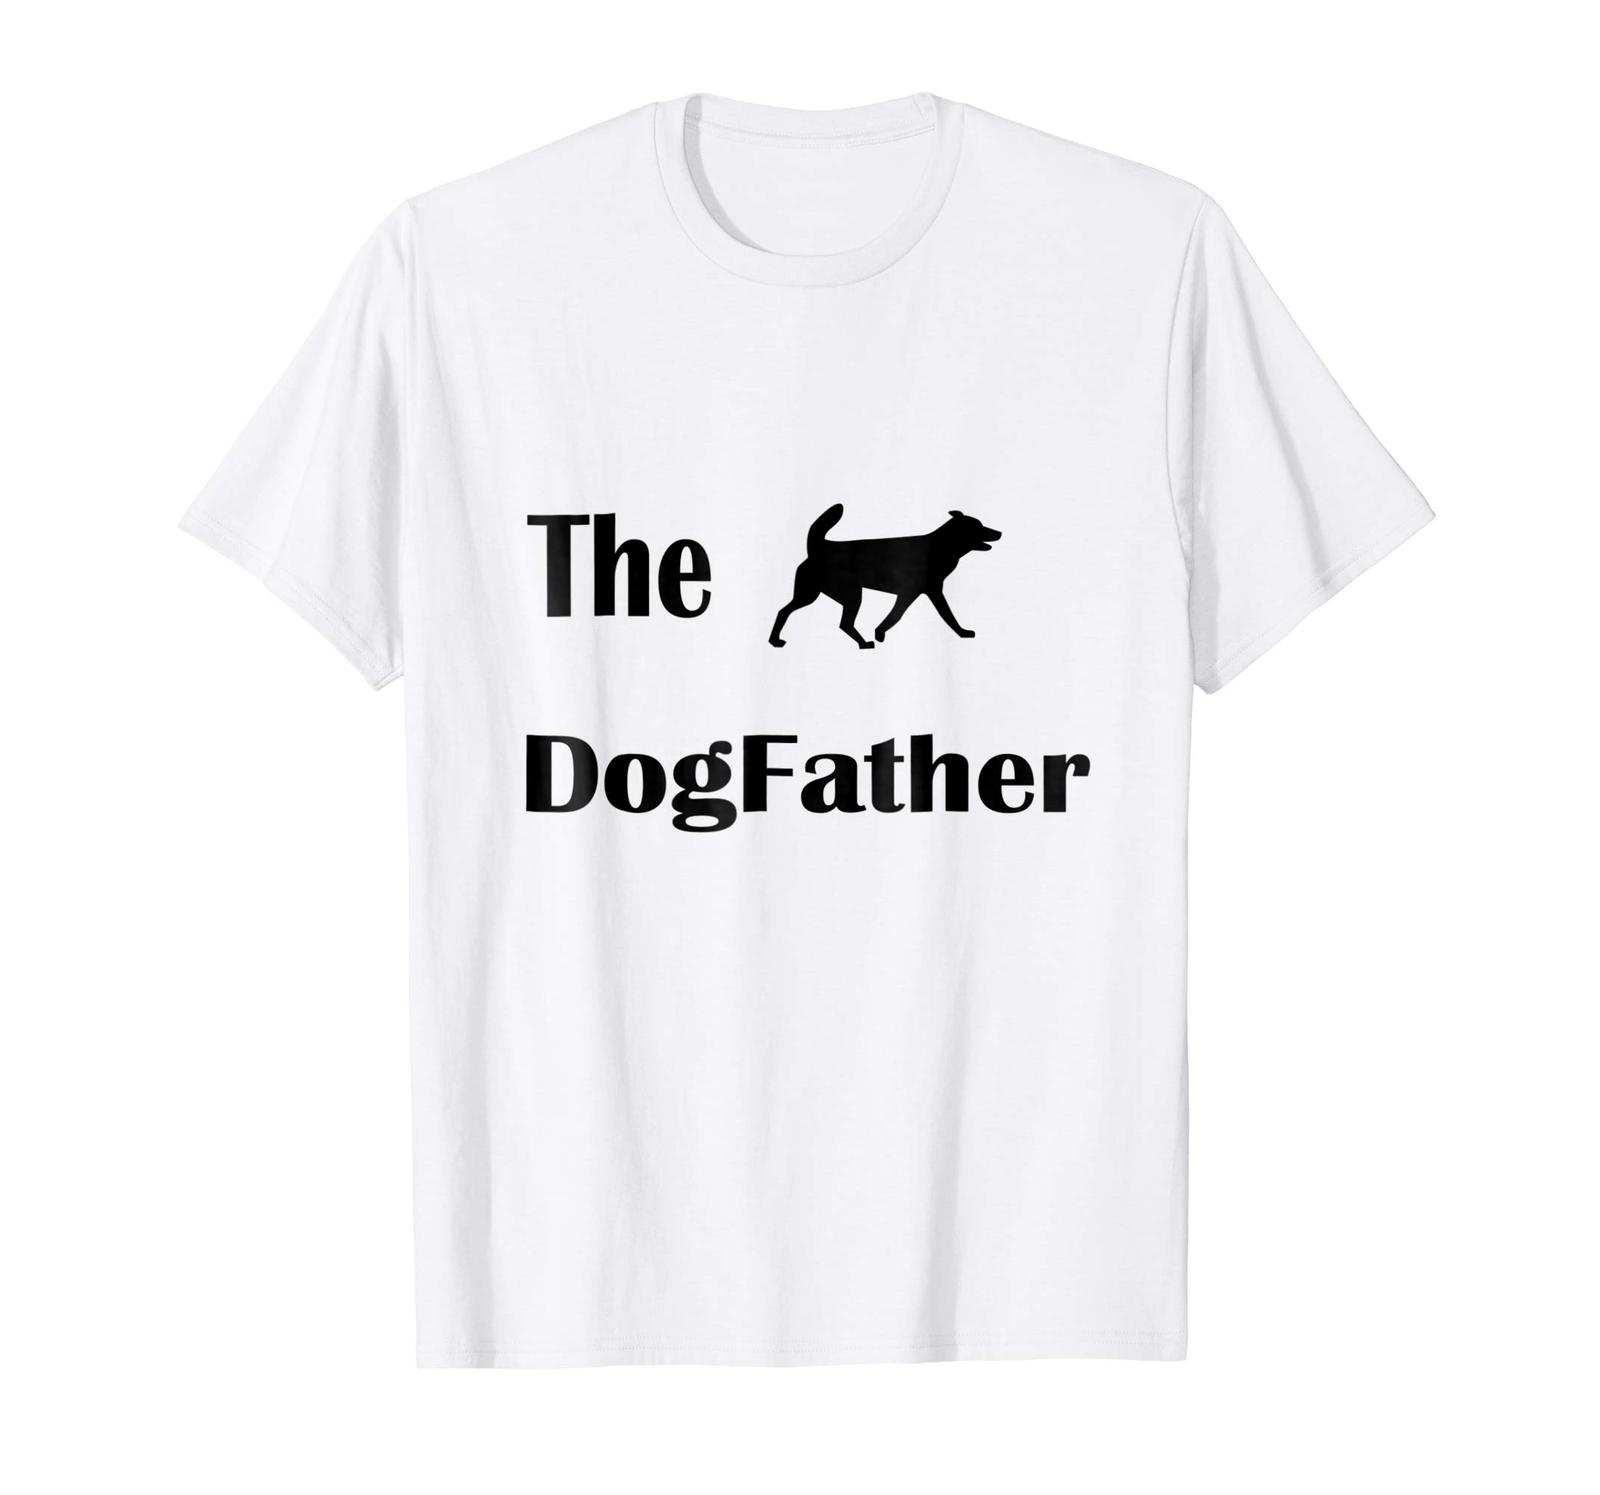 New Tee - The Dogfather T-Shirt Men - T-Shirts